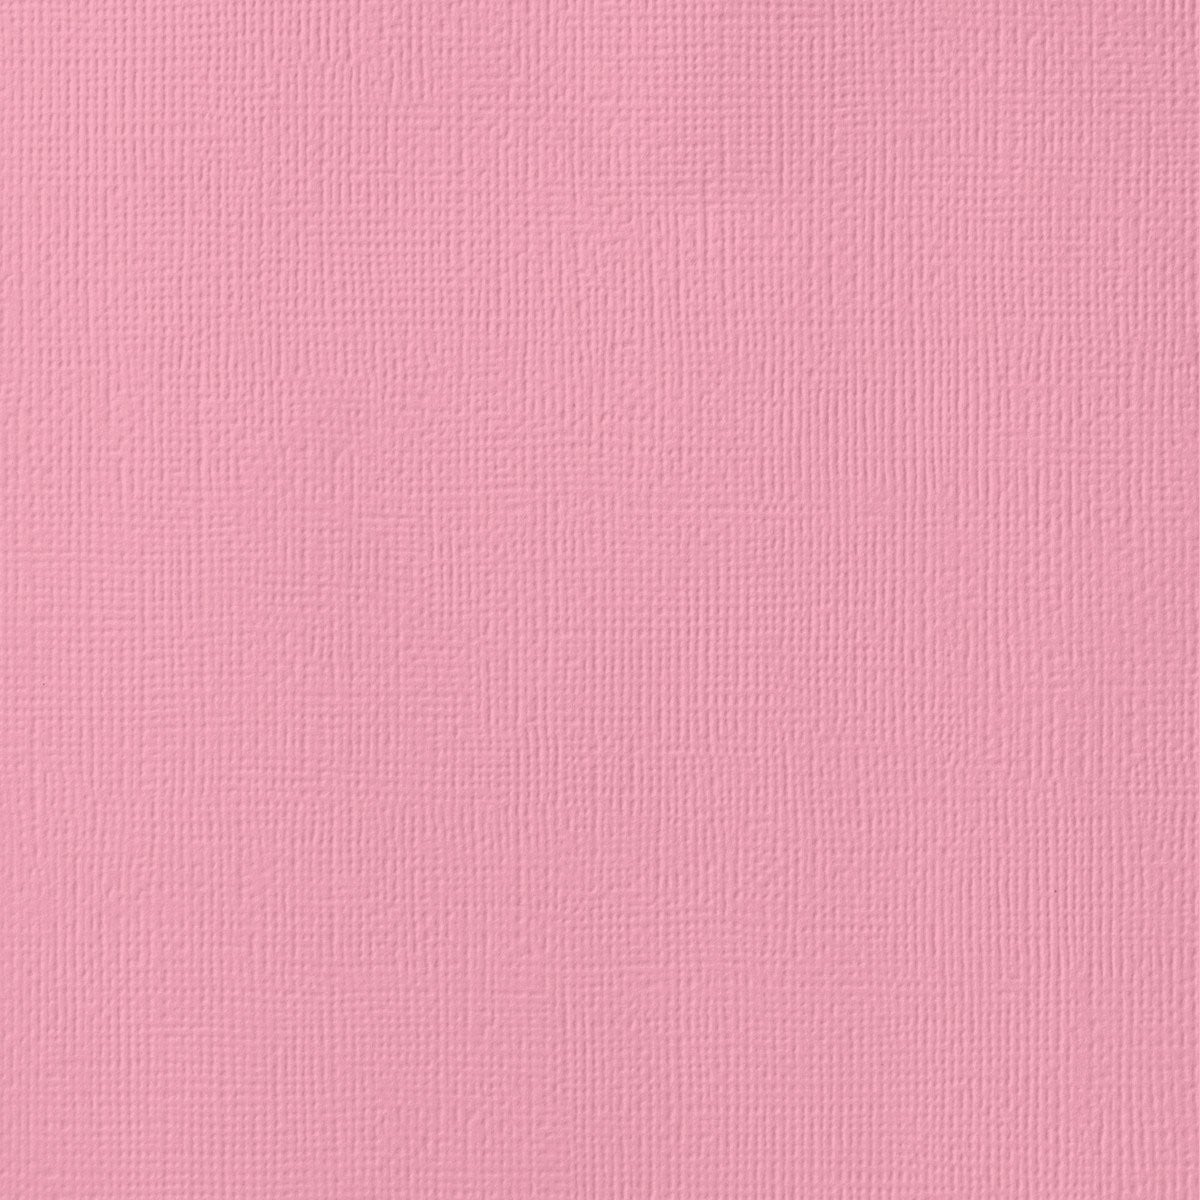 12x12 Textured Cardstock | 80 lb Blush Pink Scrapbook Paper | Premium Card  Making and Paper Crafting Supplies | 25 Sheets per PackF